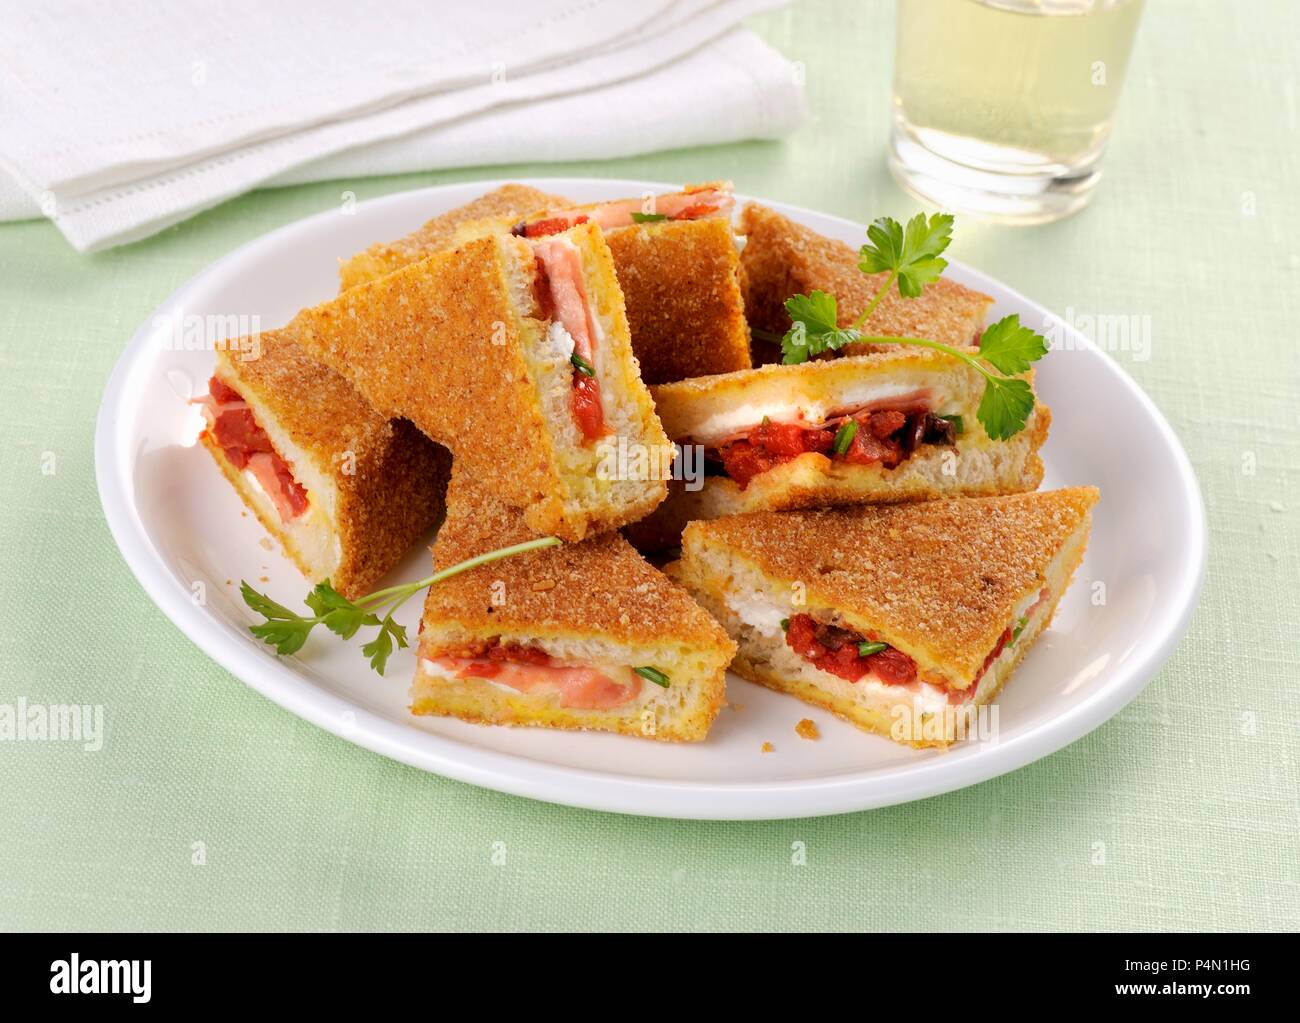 Fried sandwiches filled with roasted tomatoes Stock Photo